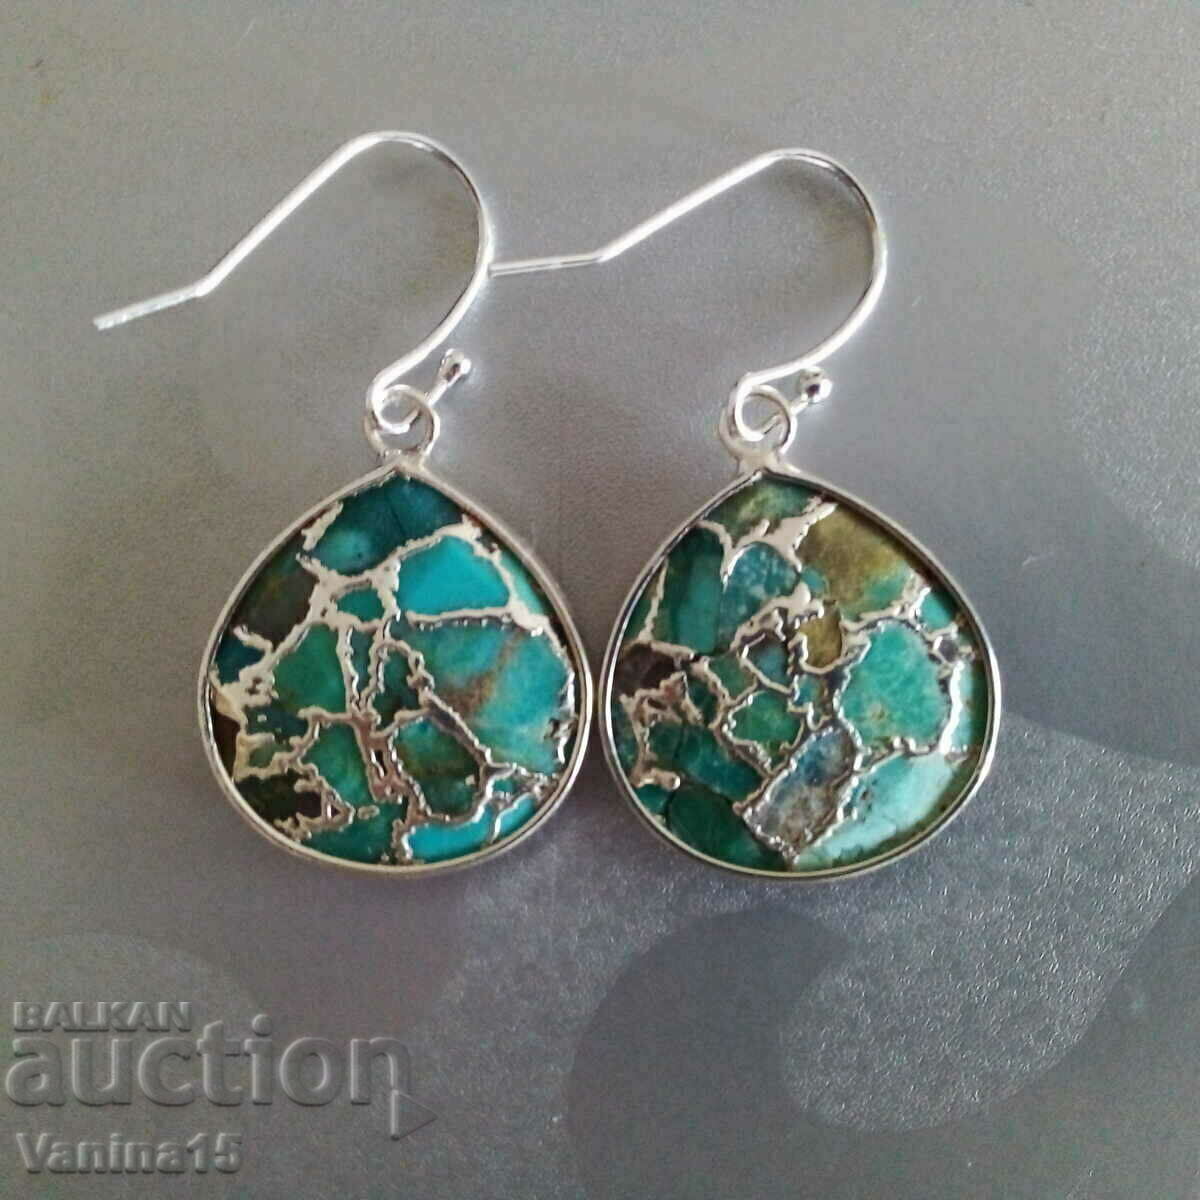 Imported natural turquoise dangle earrings